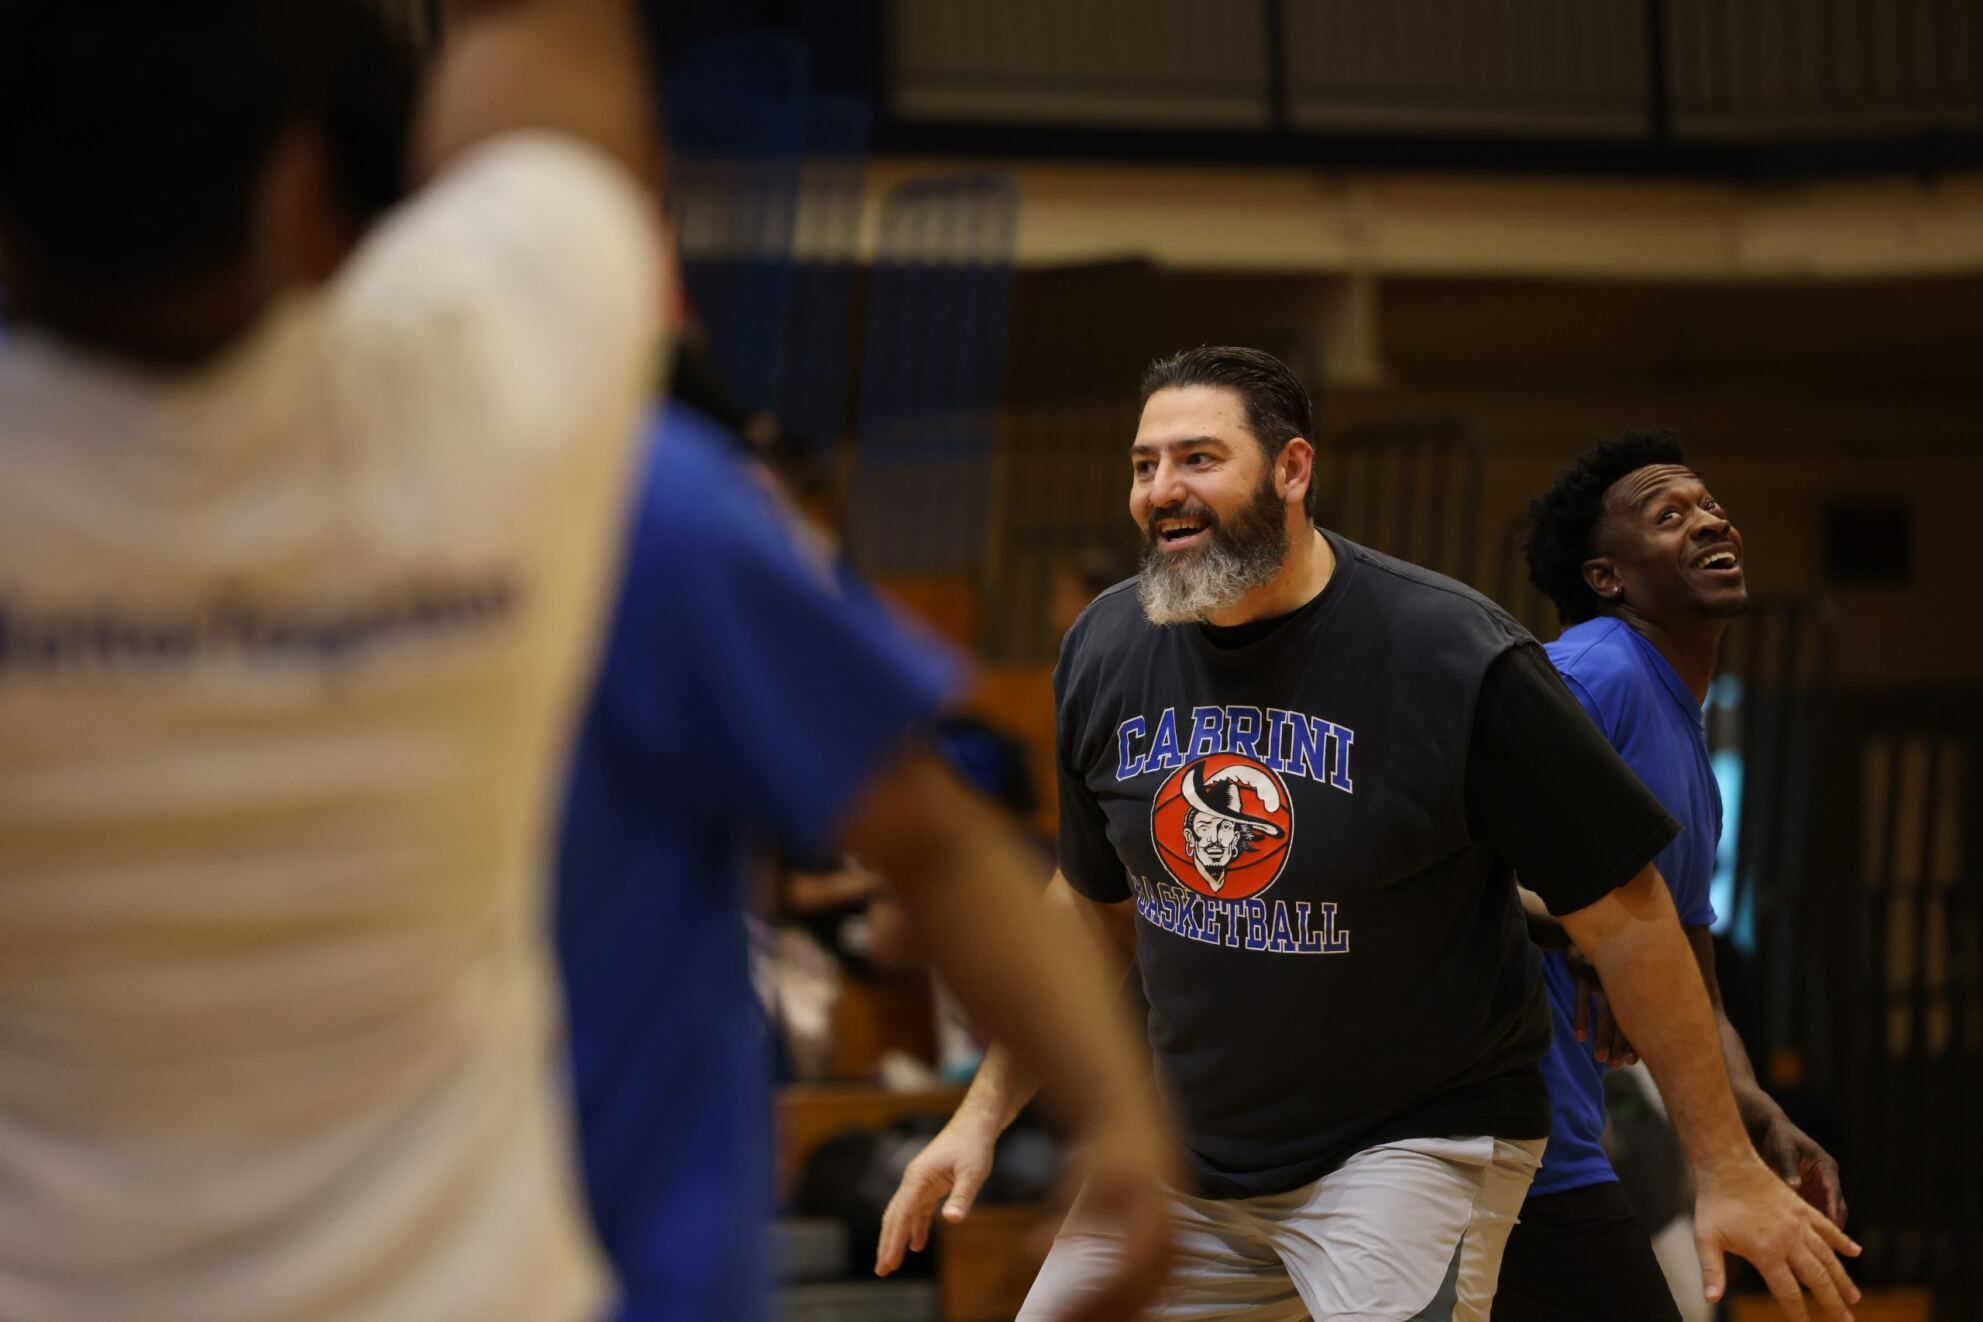 All smiles for players on the court. Photo by Samantha Taddei.